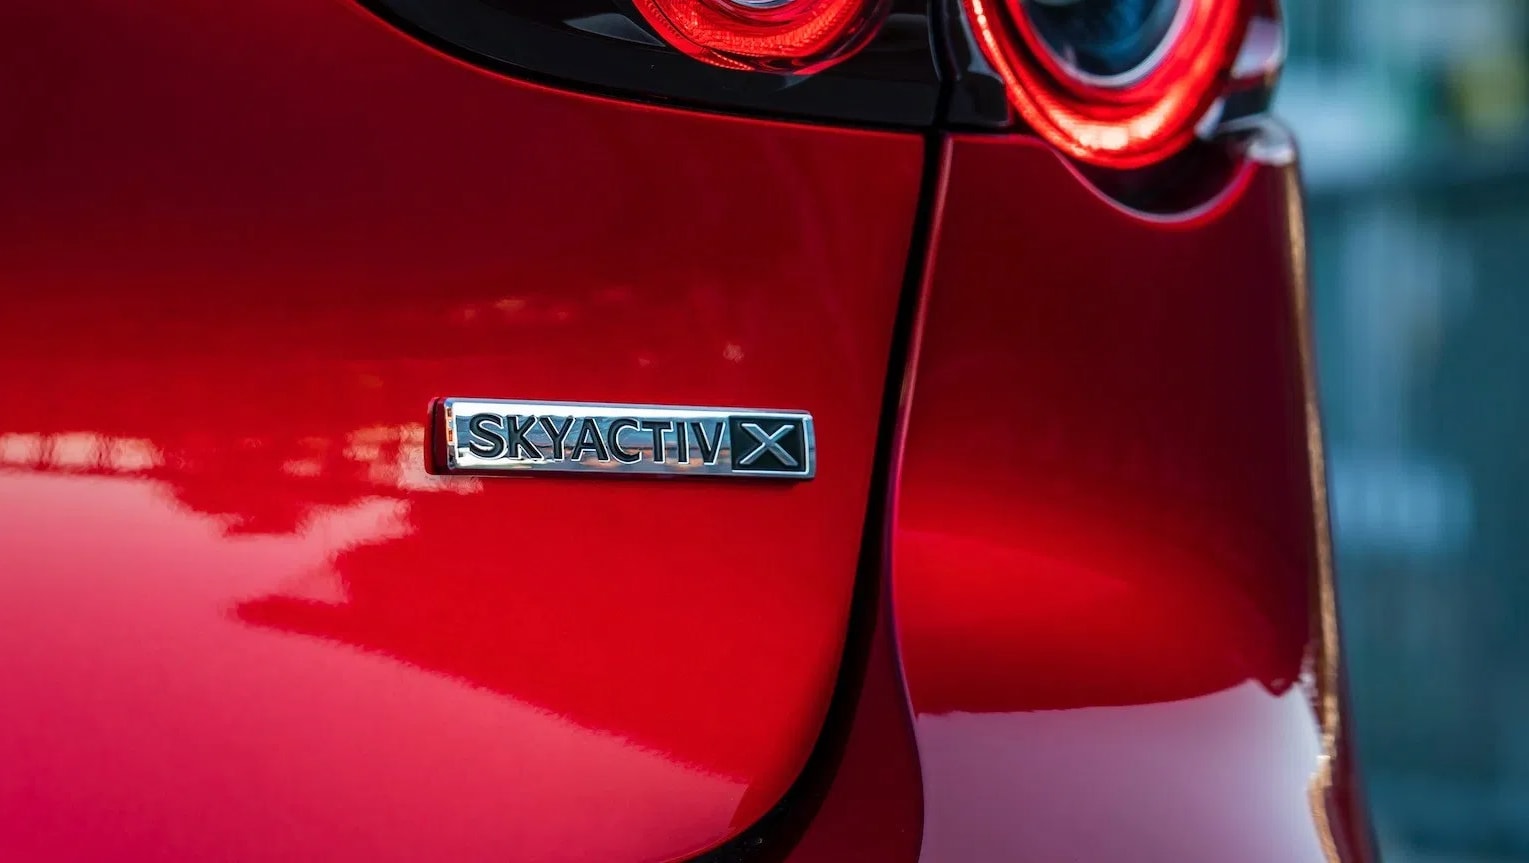 New Mazda 3 And Cx 30 2020 Skyactiv X Pricing And Specs Detailed The Premium You Ll Pay For Mazda S Groundbreaking Engine Tech Car News Carsguide